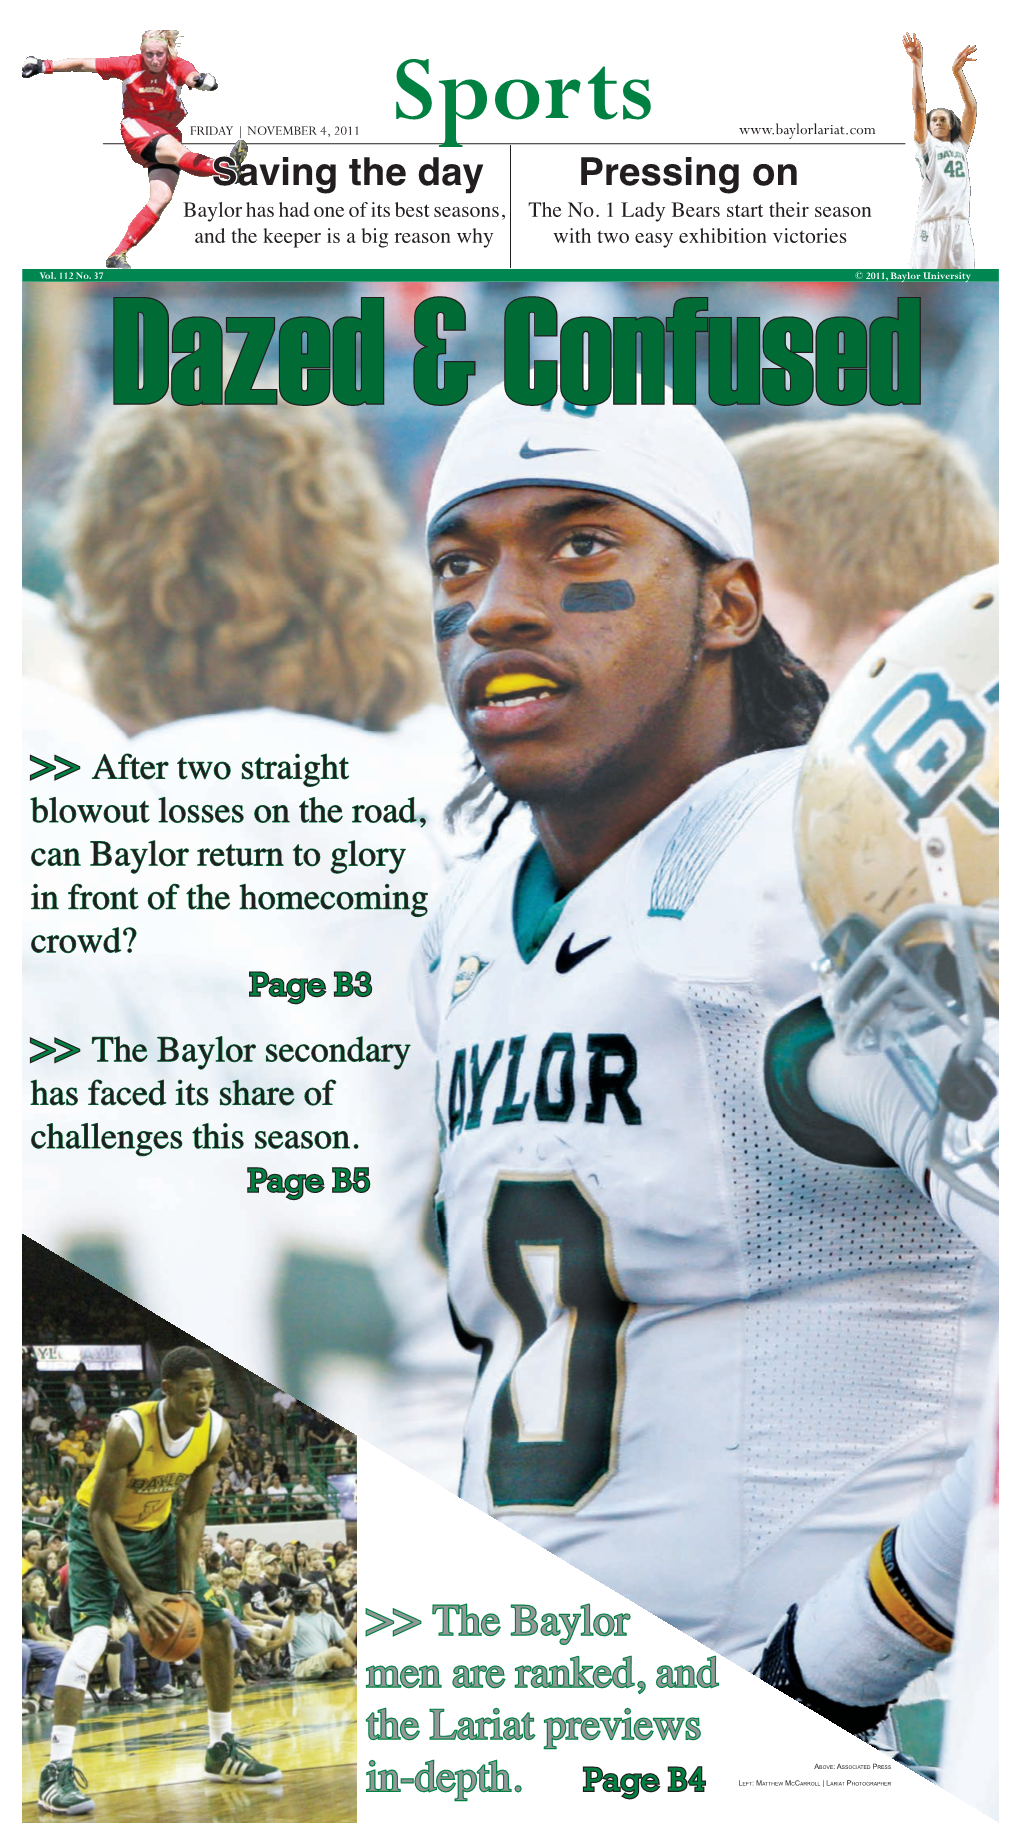 The Baylor Men Are Ranked, and the Lariat Previews In-Depth. Page B4